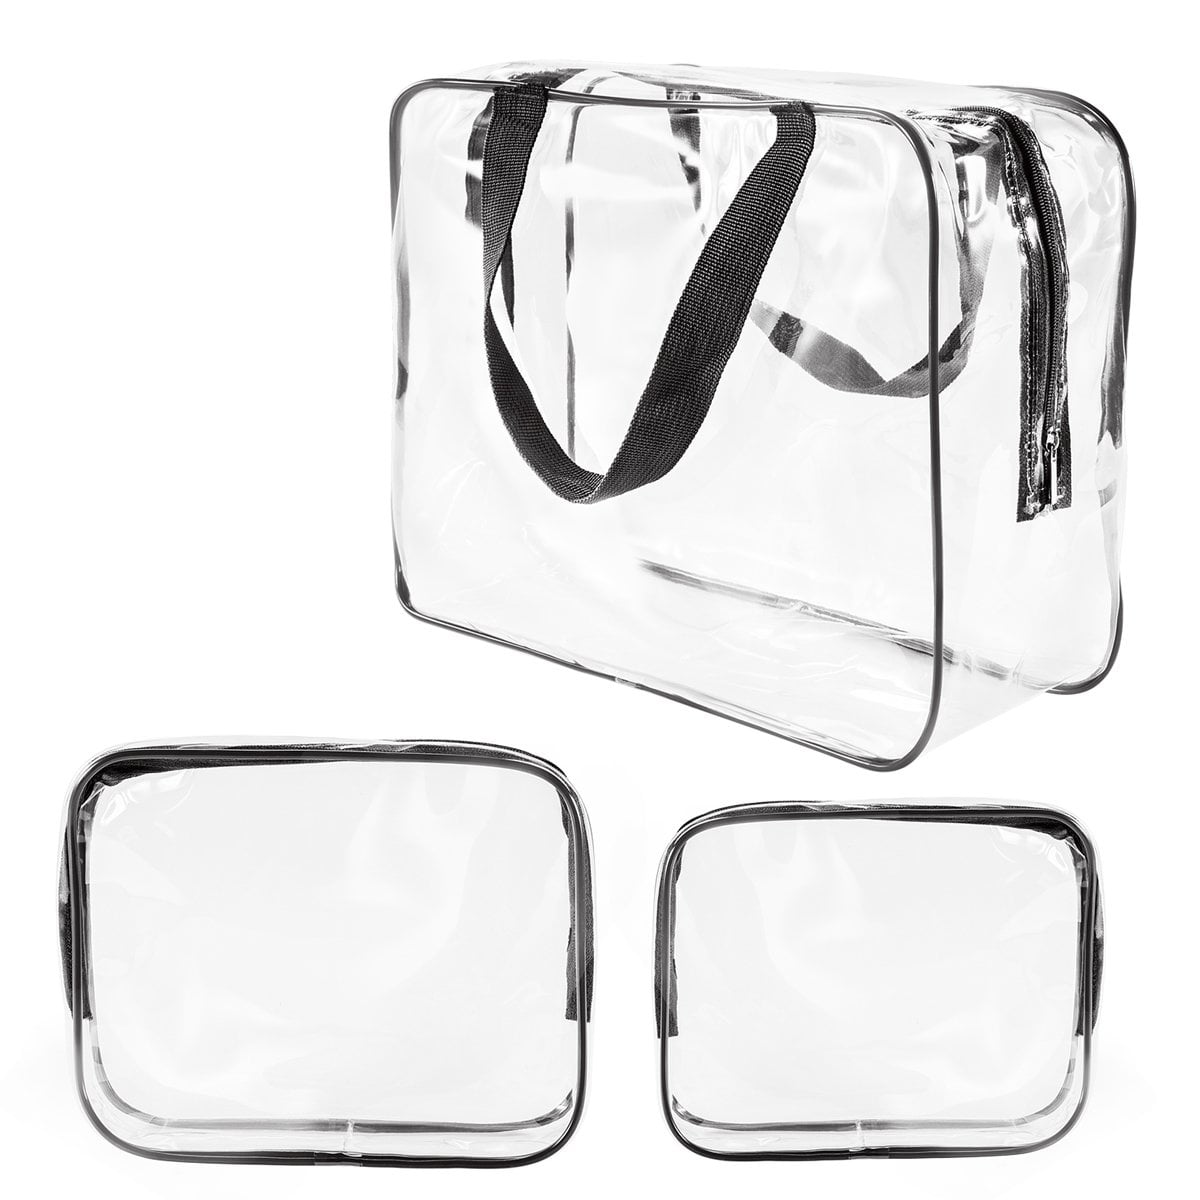 Color Handles Clear Plastic Tote Bags